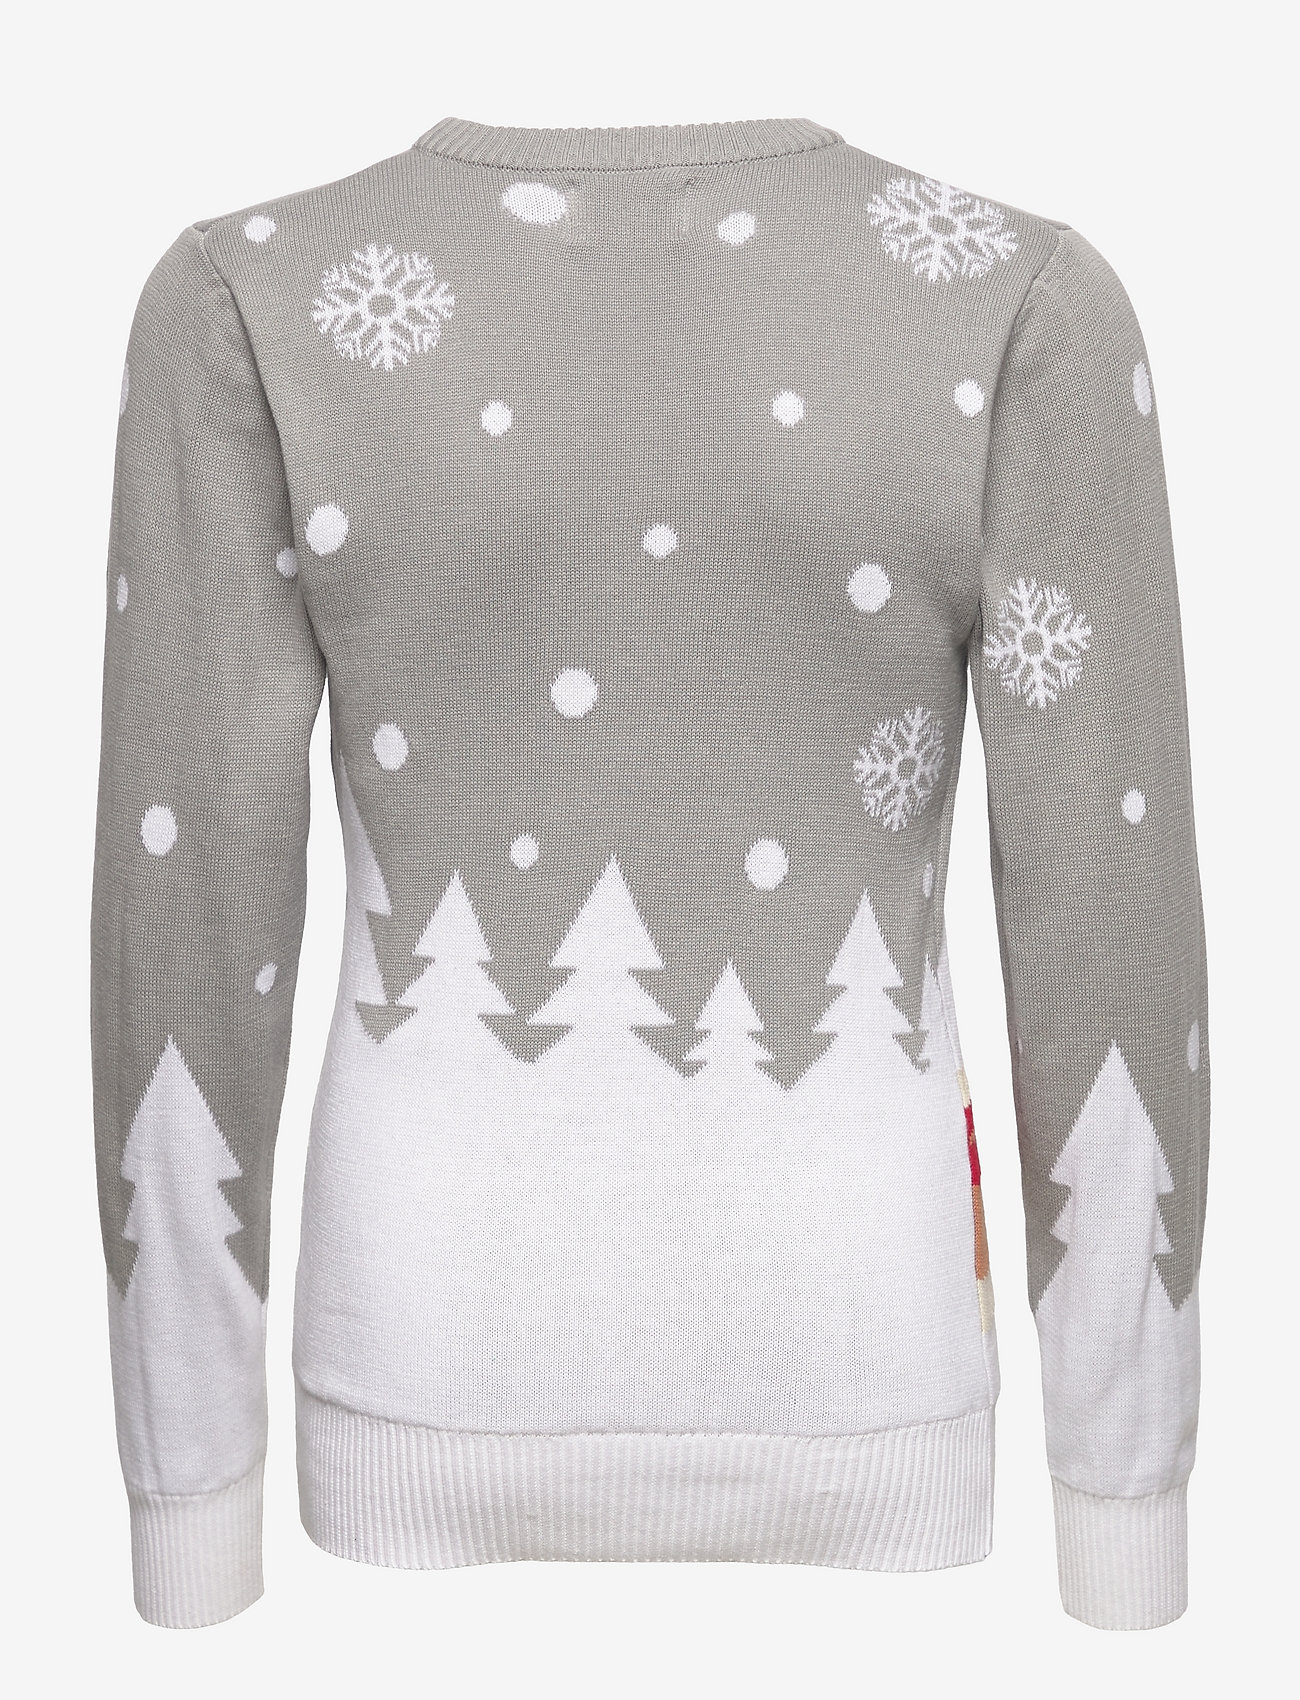 Christmas Sweats - The Cute sweater - pullover - grey - 1